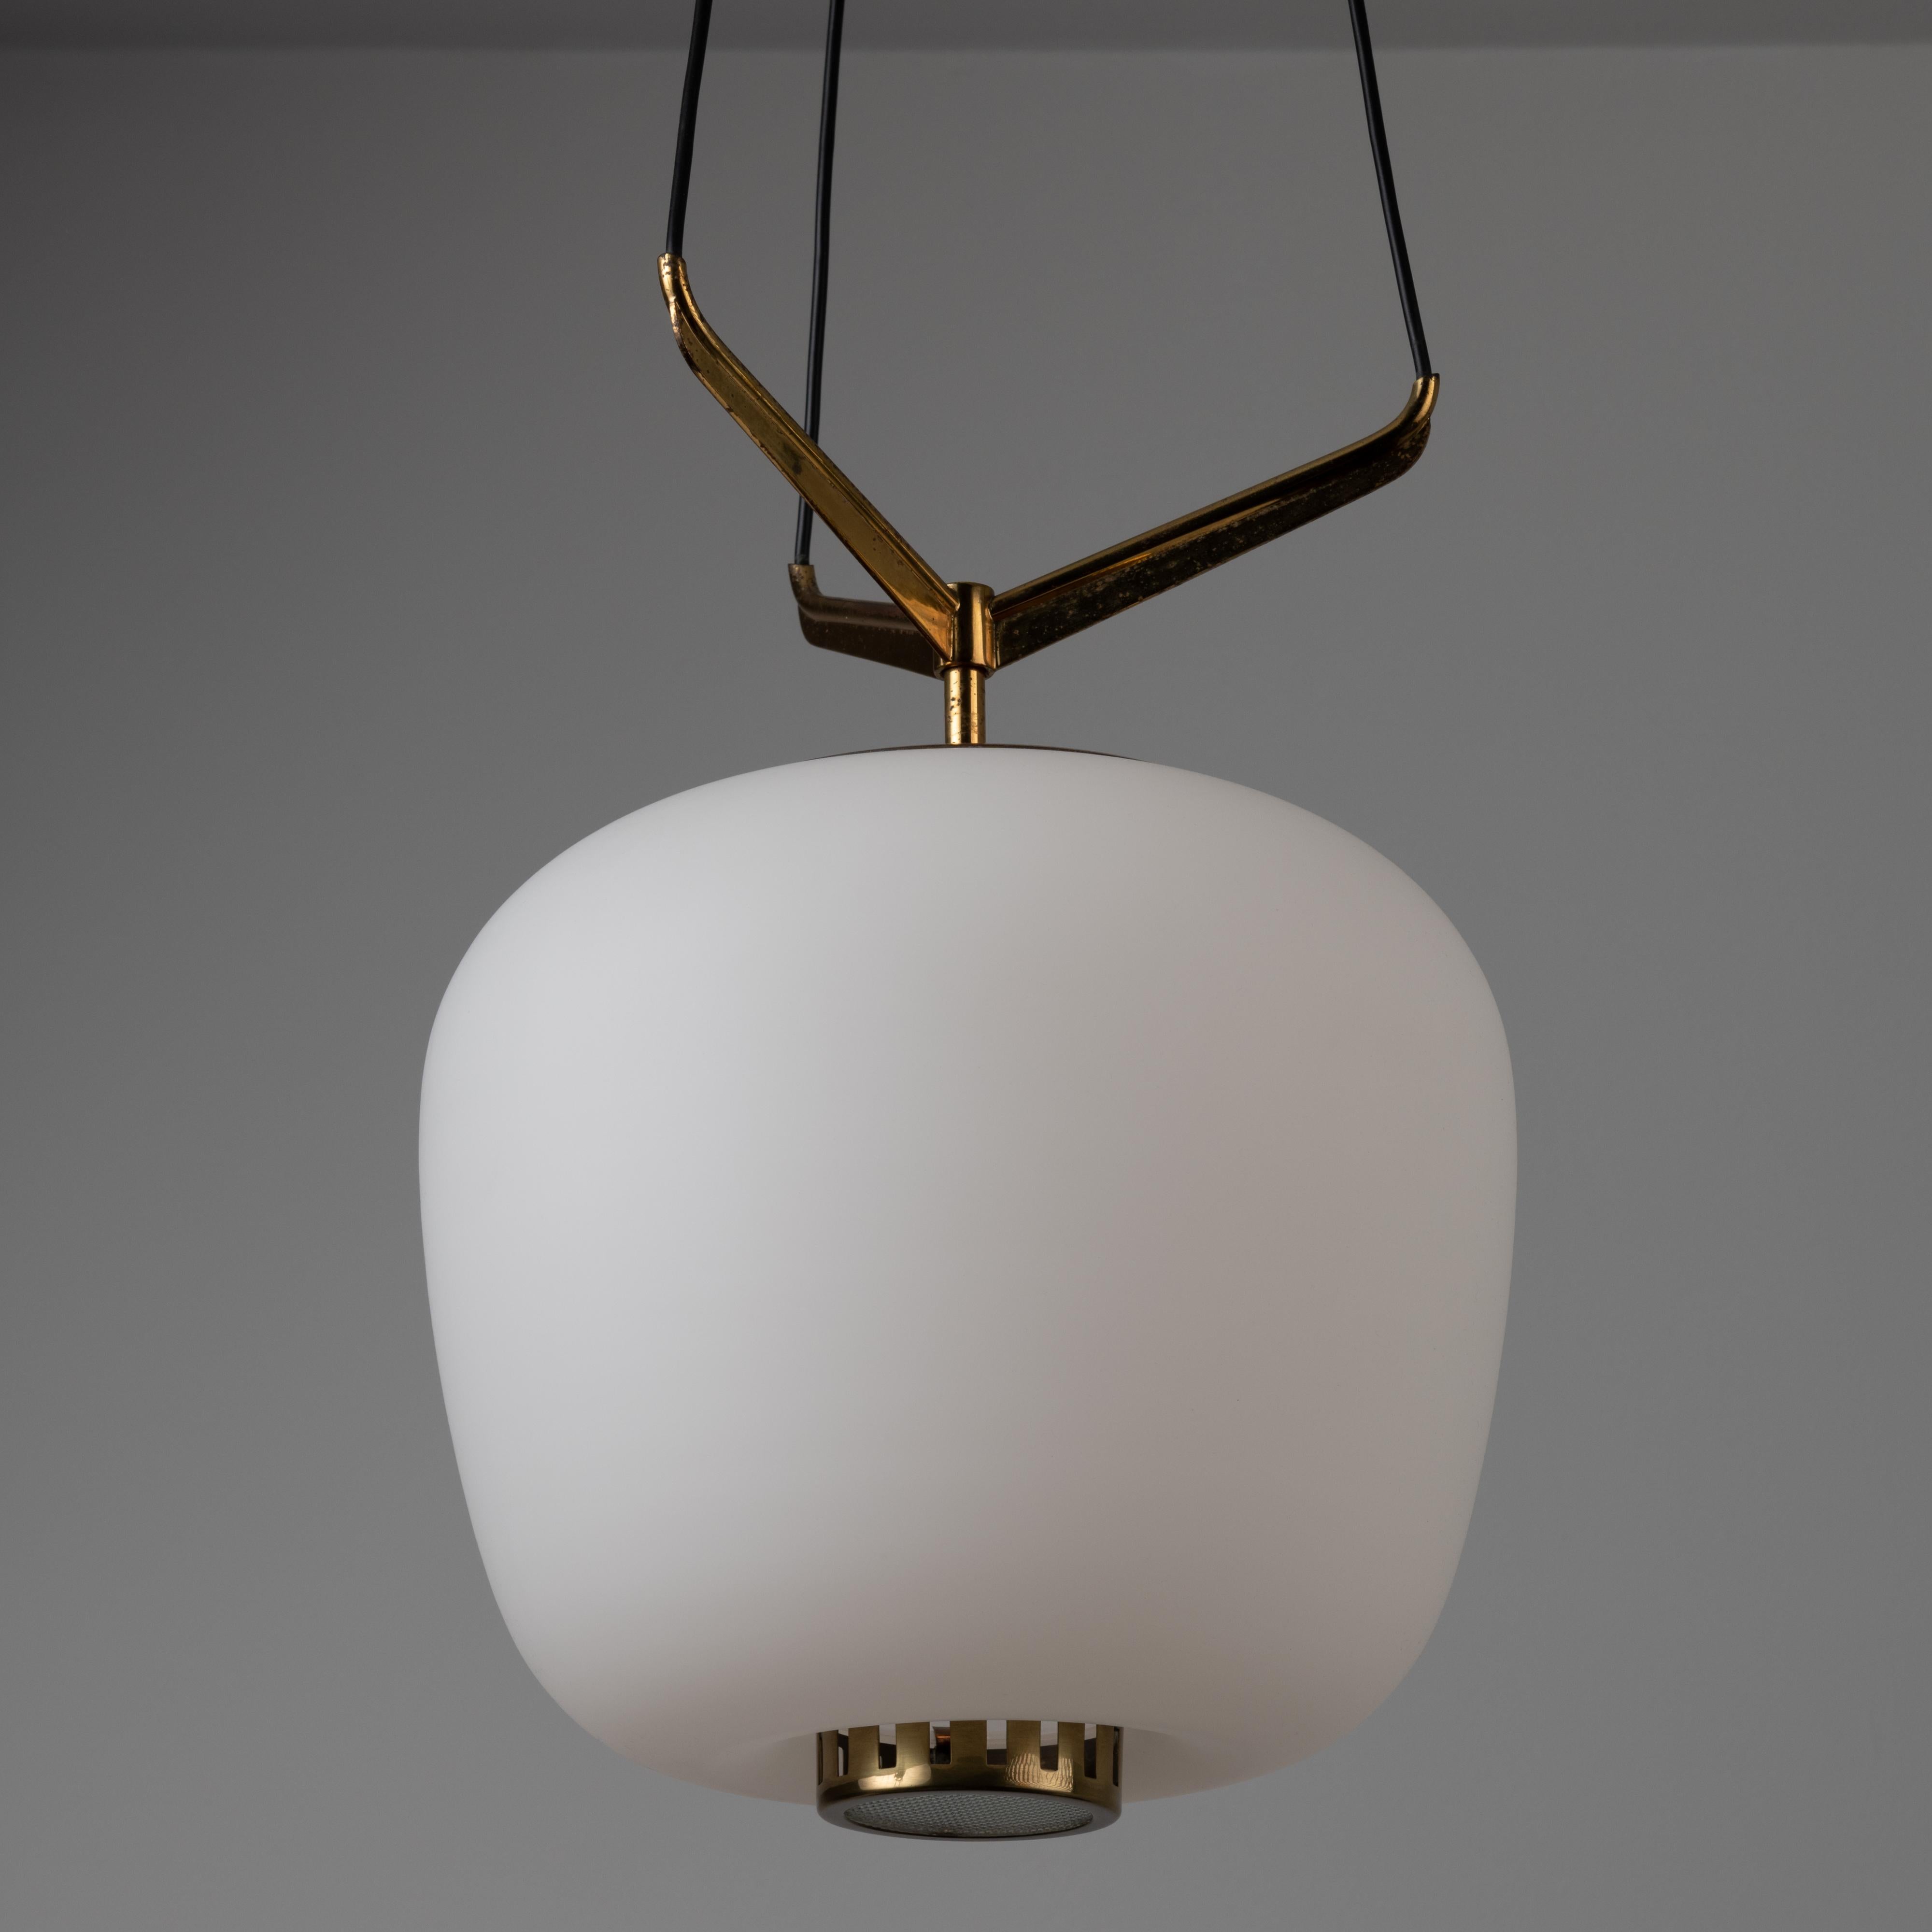 Suspension light by Stilnovo. Manufactured in Italy, circa the 1950s. Features a large frosted glass shade and three brass suspension armatures. Bottom reeded glass diffuser adds a nice detail to this iconic Stilnovo design. Rewired for U.S.